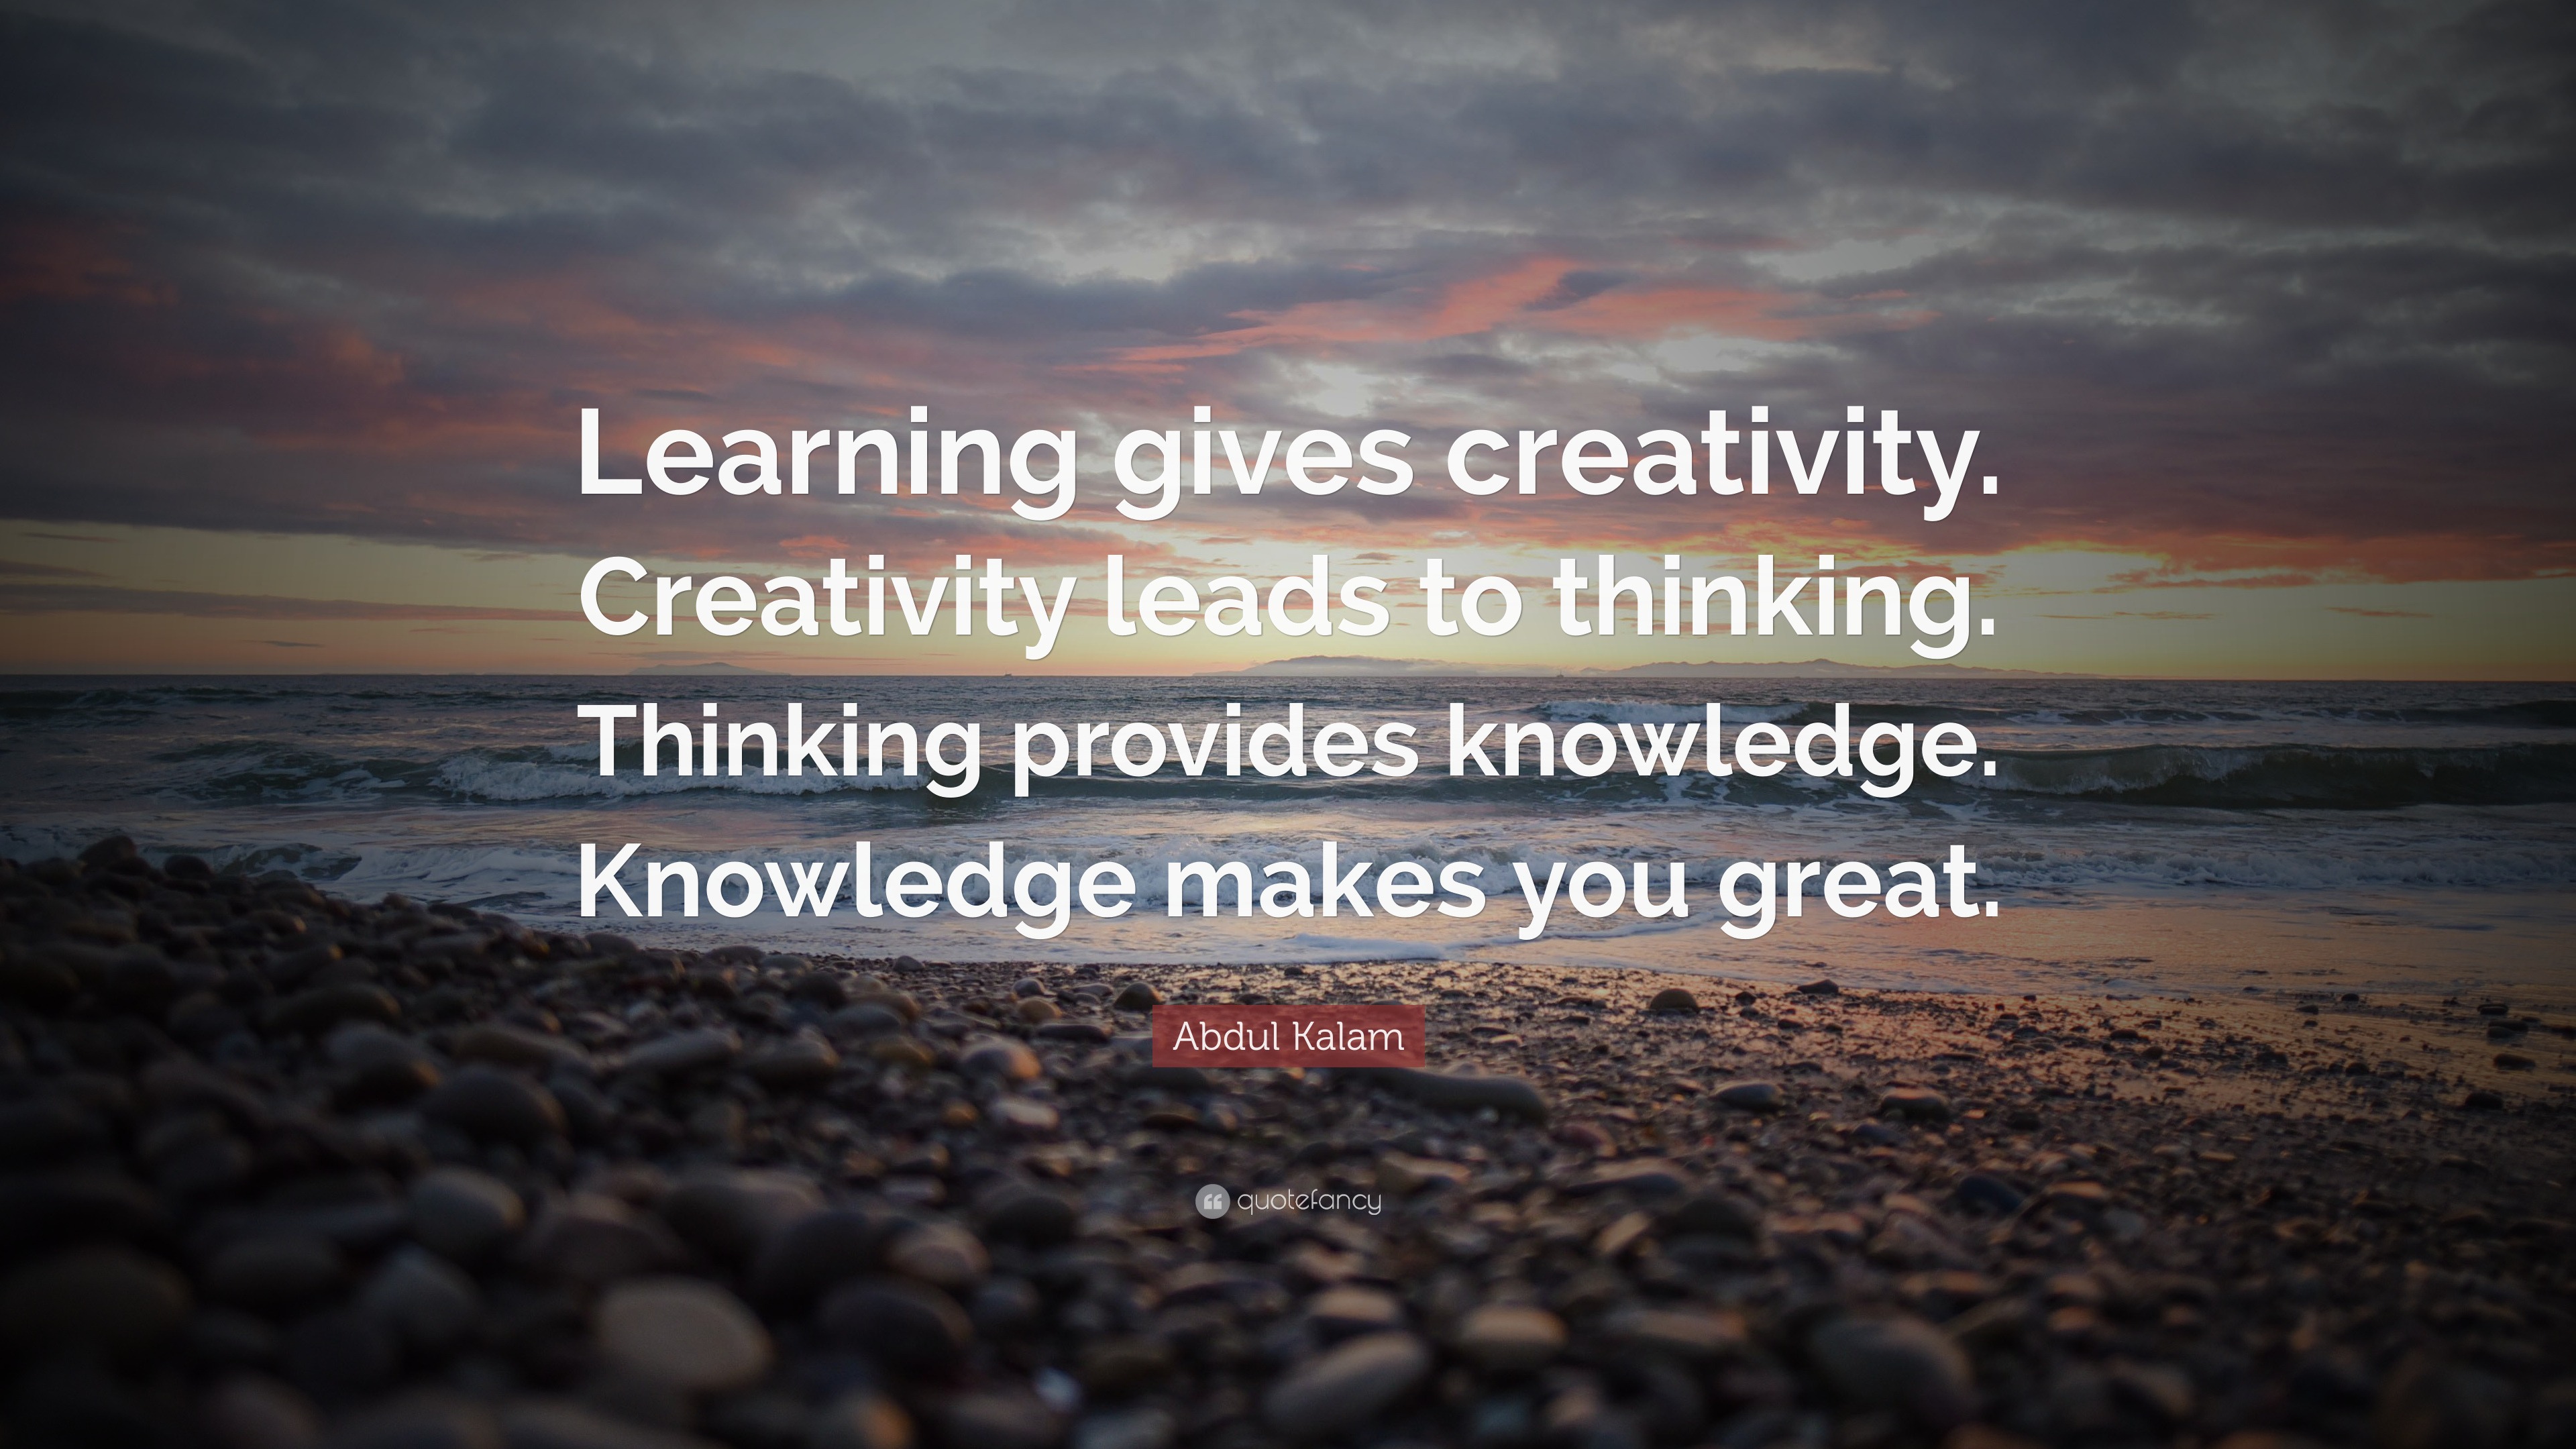 Abdul Kalam Quote “Learning gives creativity. Creativity